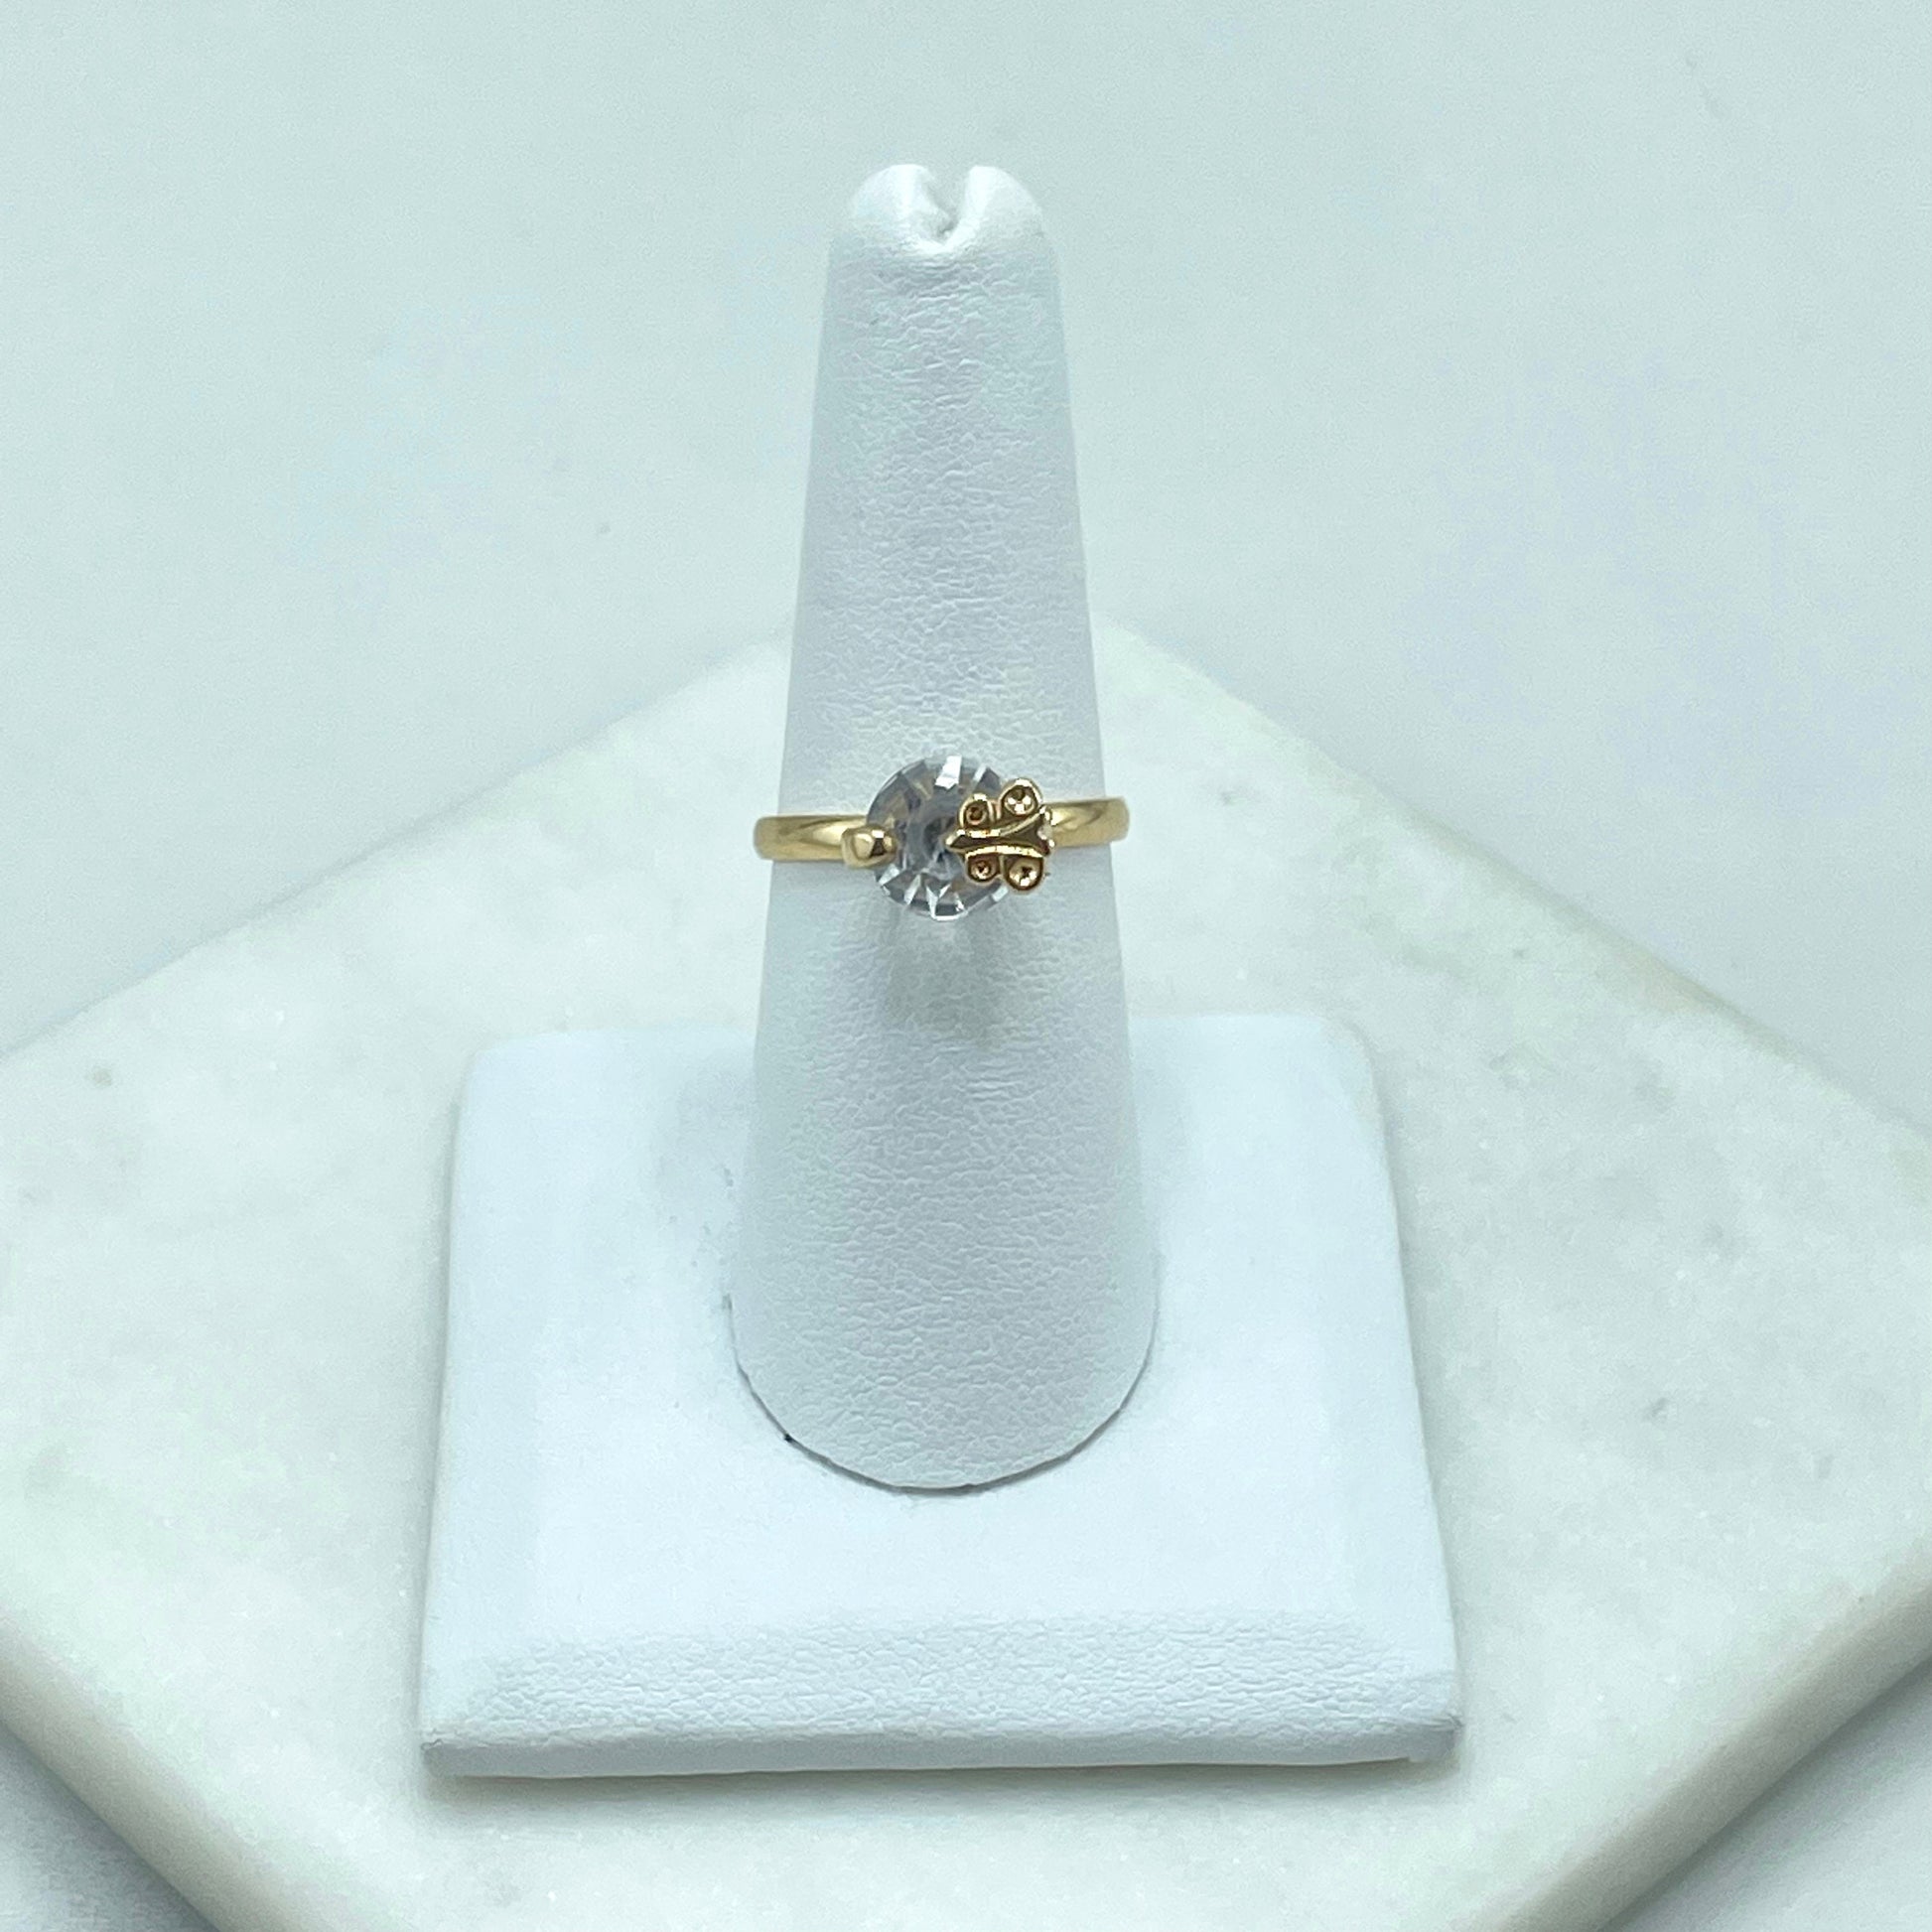 18k Gold Filled Colored Zirconia Solitaire Birthstone Wedding Couple Birth Stone Rings, Wholesale Jewelry Making Supplies